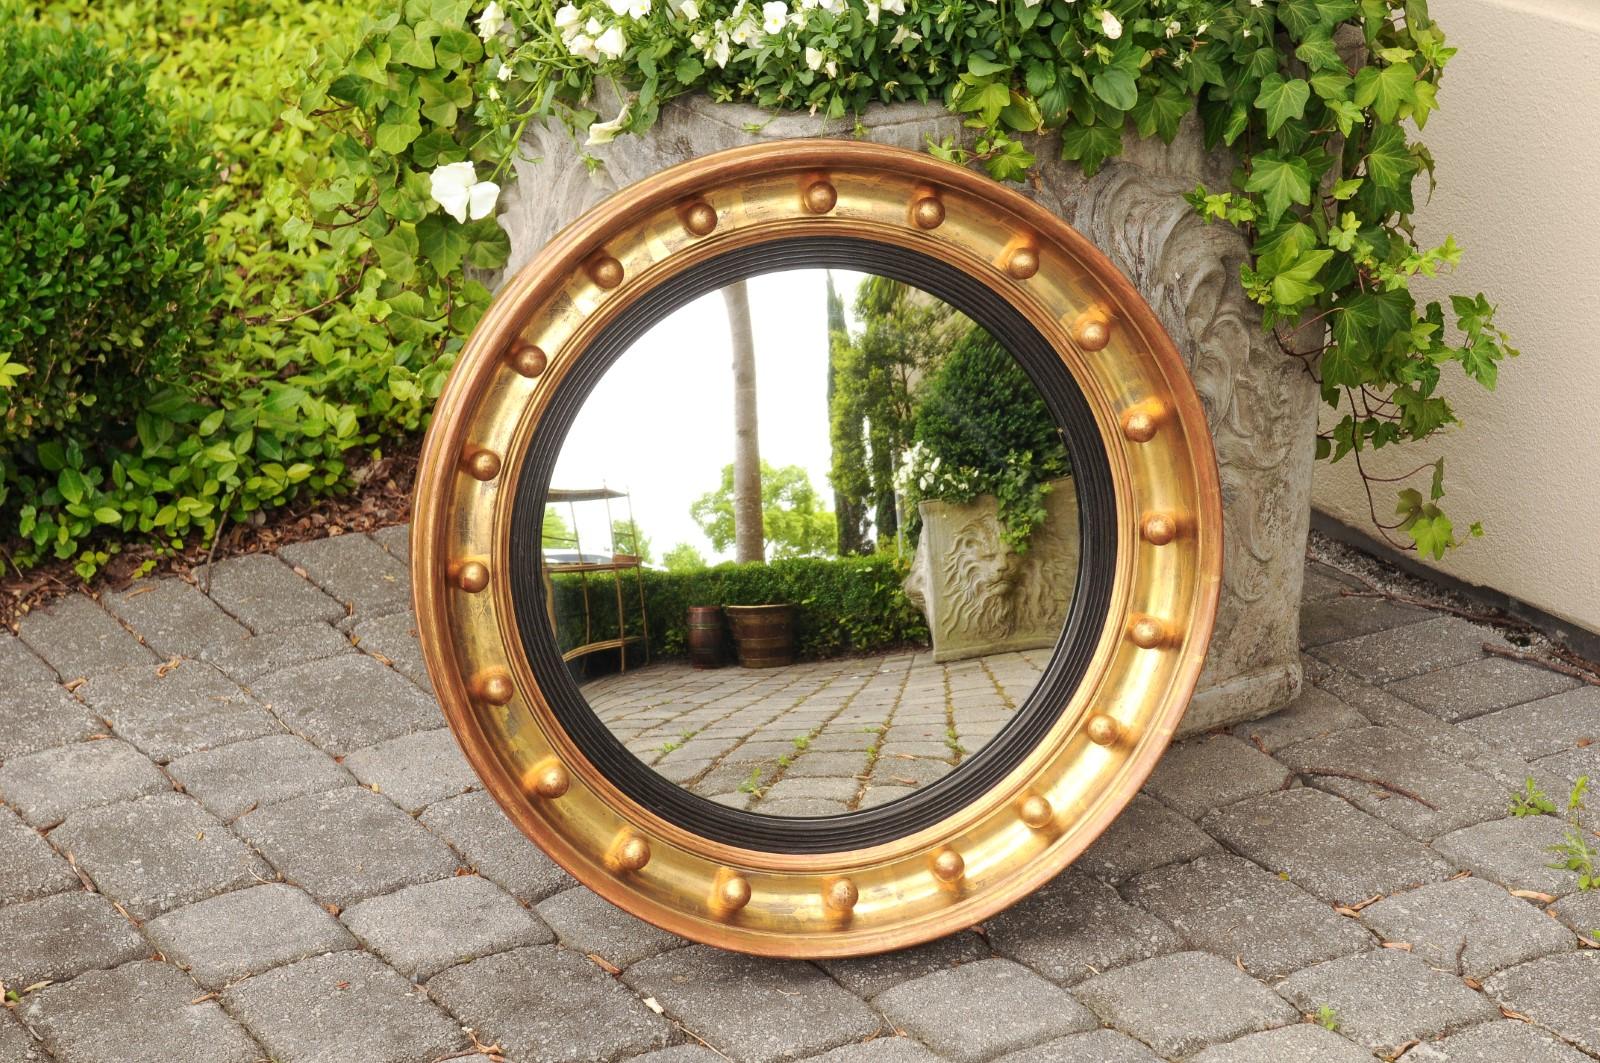 An English giltwood bullseye convex girandole mirror from the late 19th century with ebonized reeded accents. Born in England during the third quarter of the 19th century, this stylish circular mirror features a convex mirror plate, surrounded by a